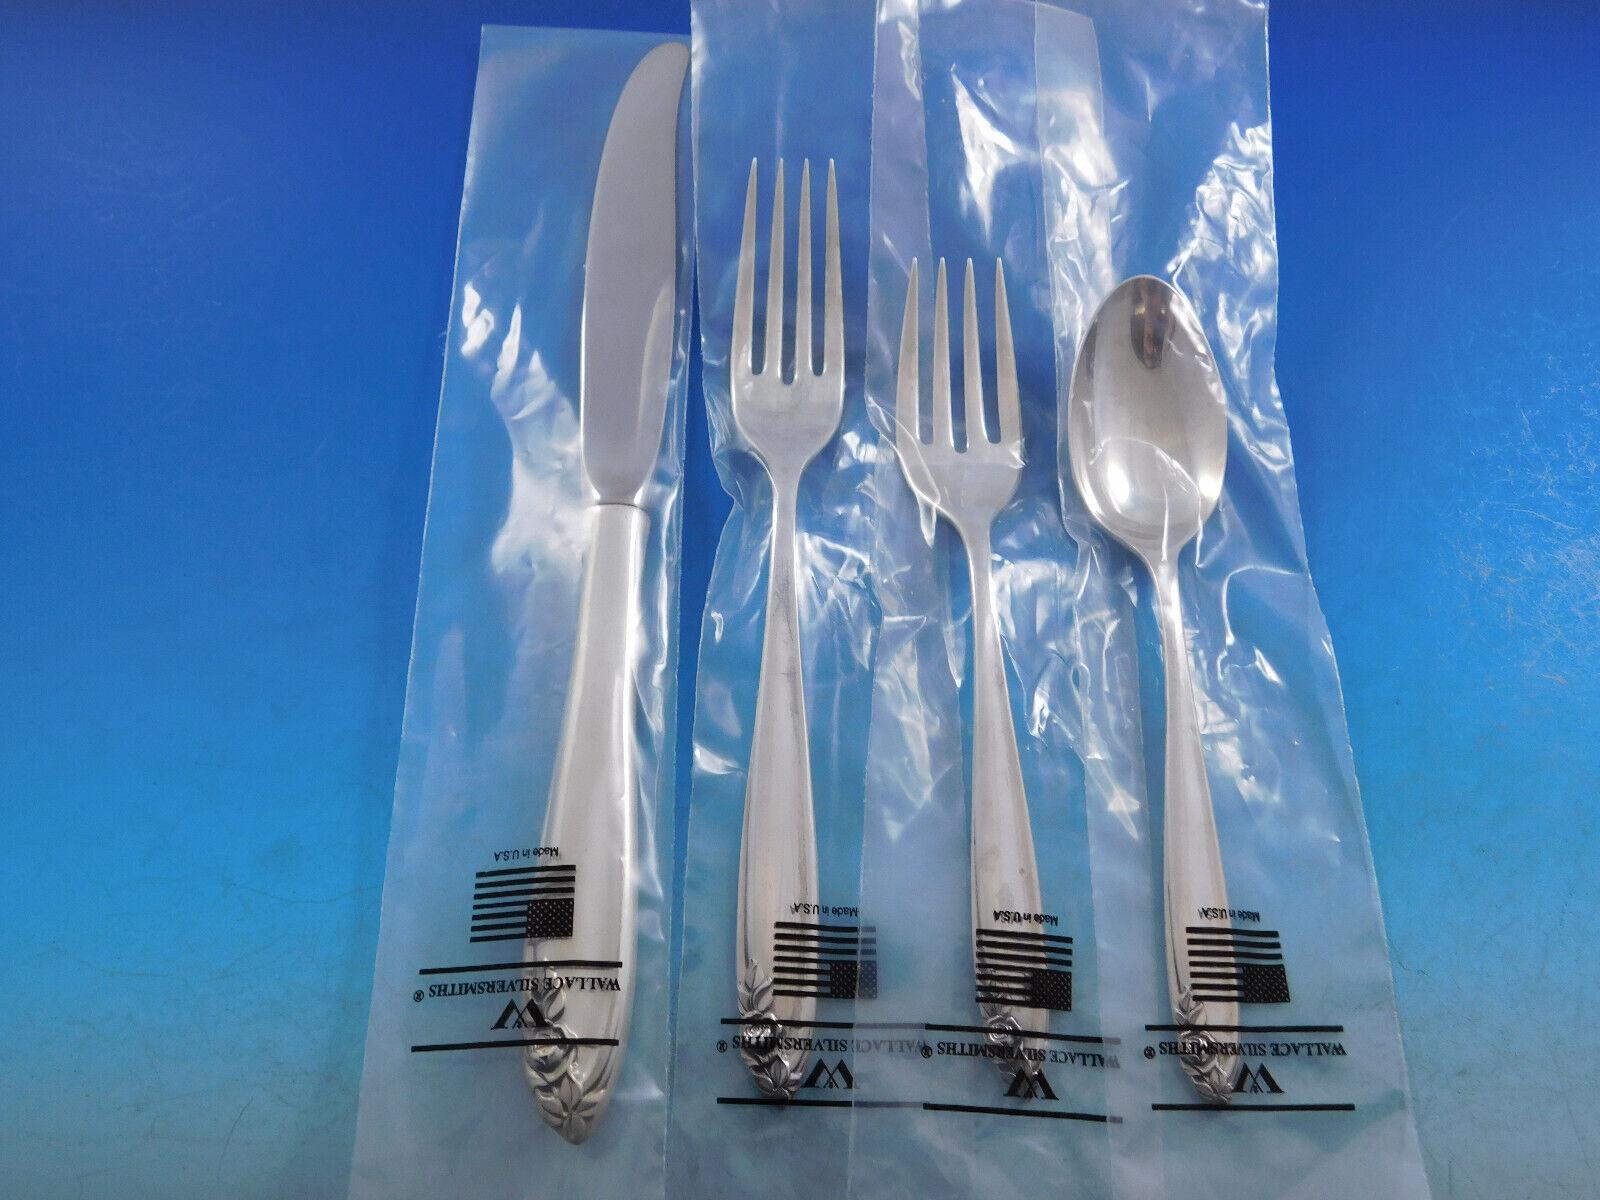 Unused Debutante by Wallace sterling silver Flatware set - 113 Pieces. This set includes:
 
12 Knives, 9 5/8